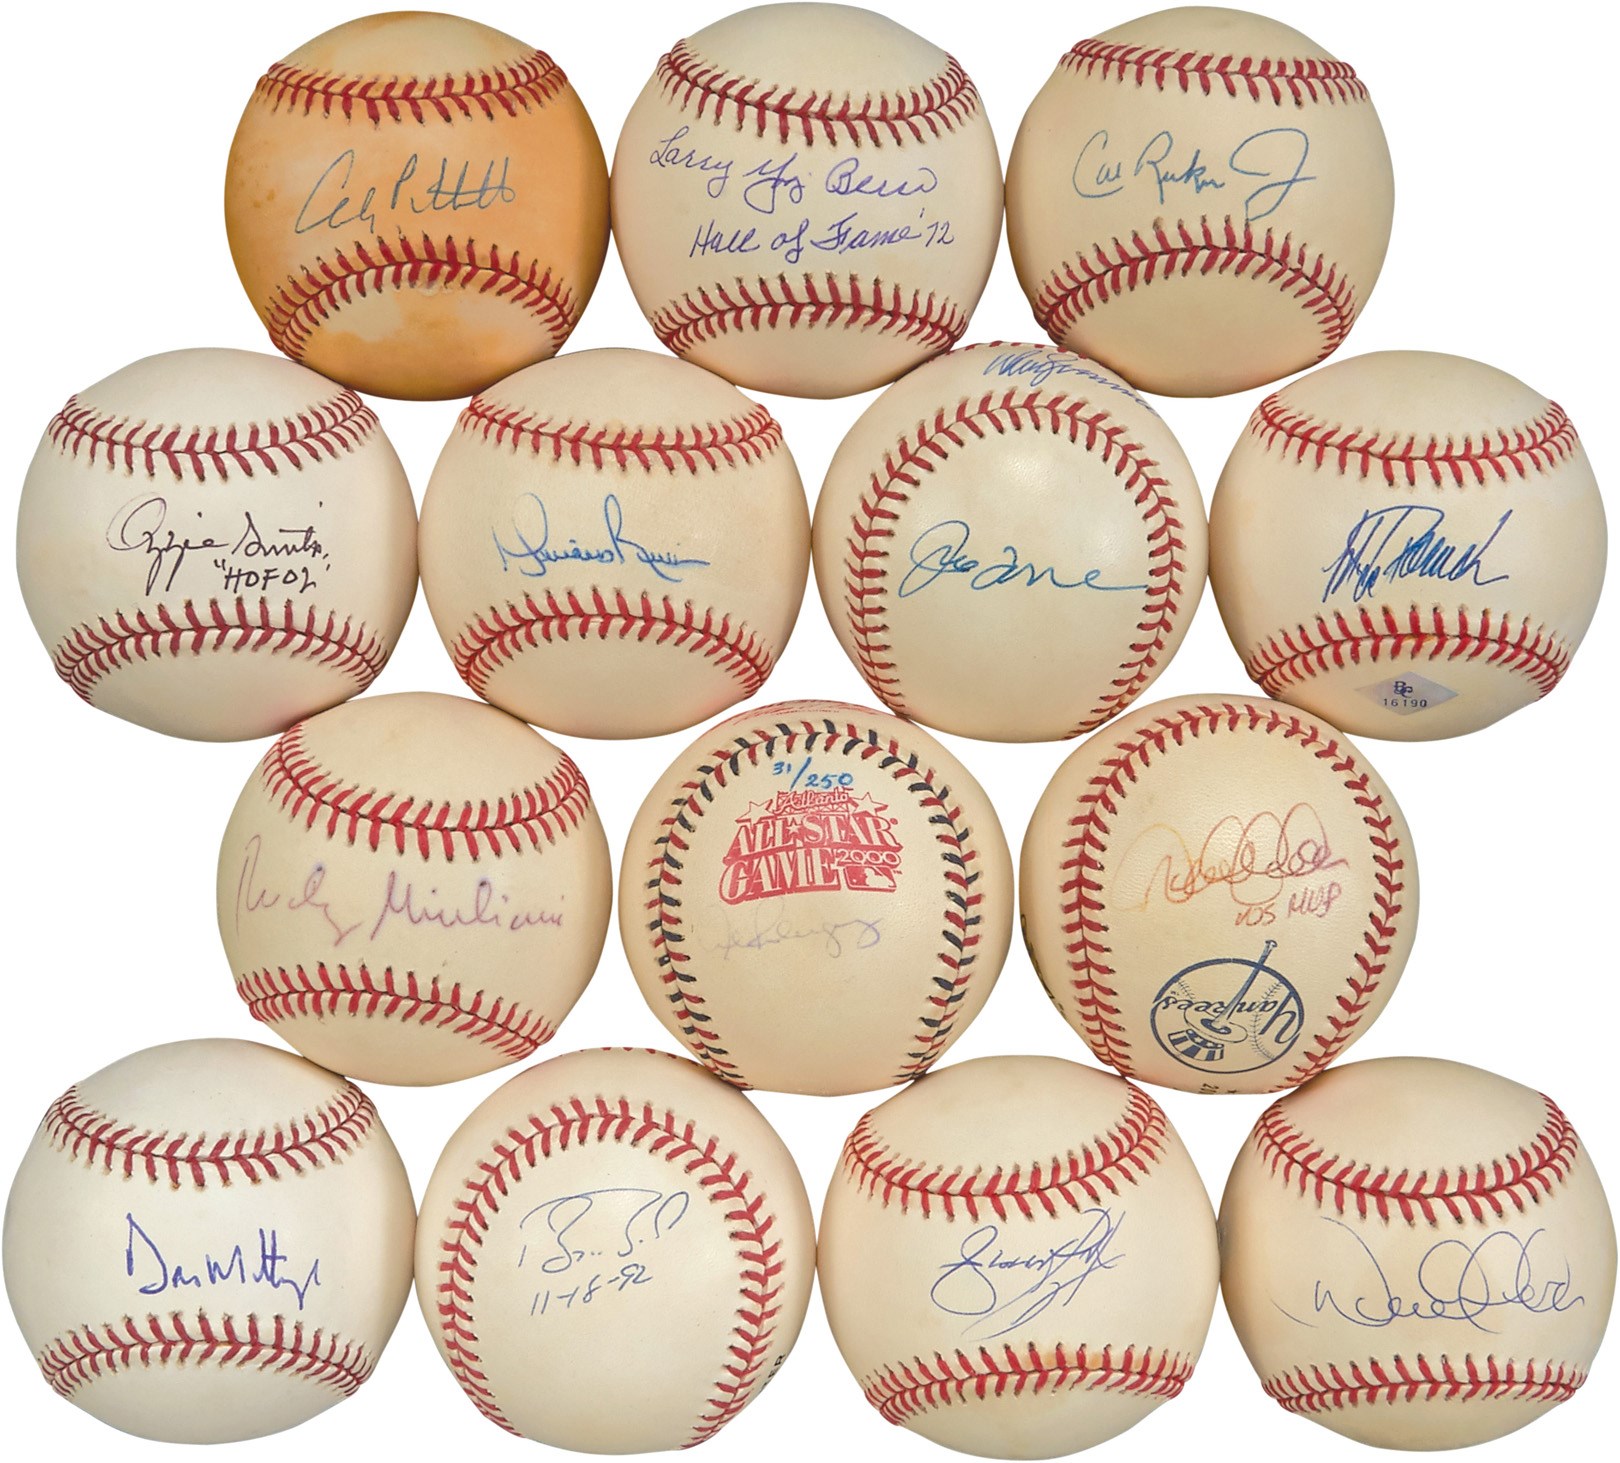 - Yankee Legends and Baseball Stars Signed Baseball Collection with (3) Jeters (35+)